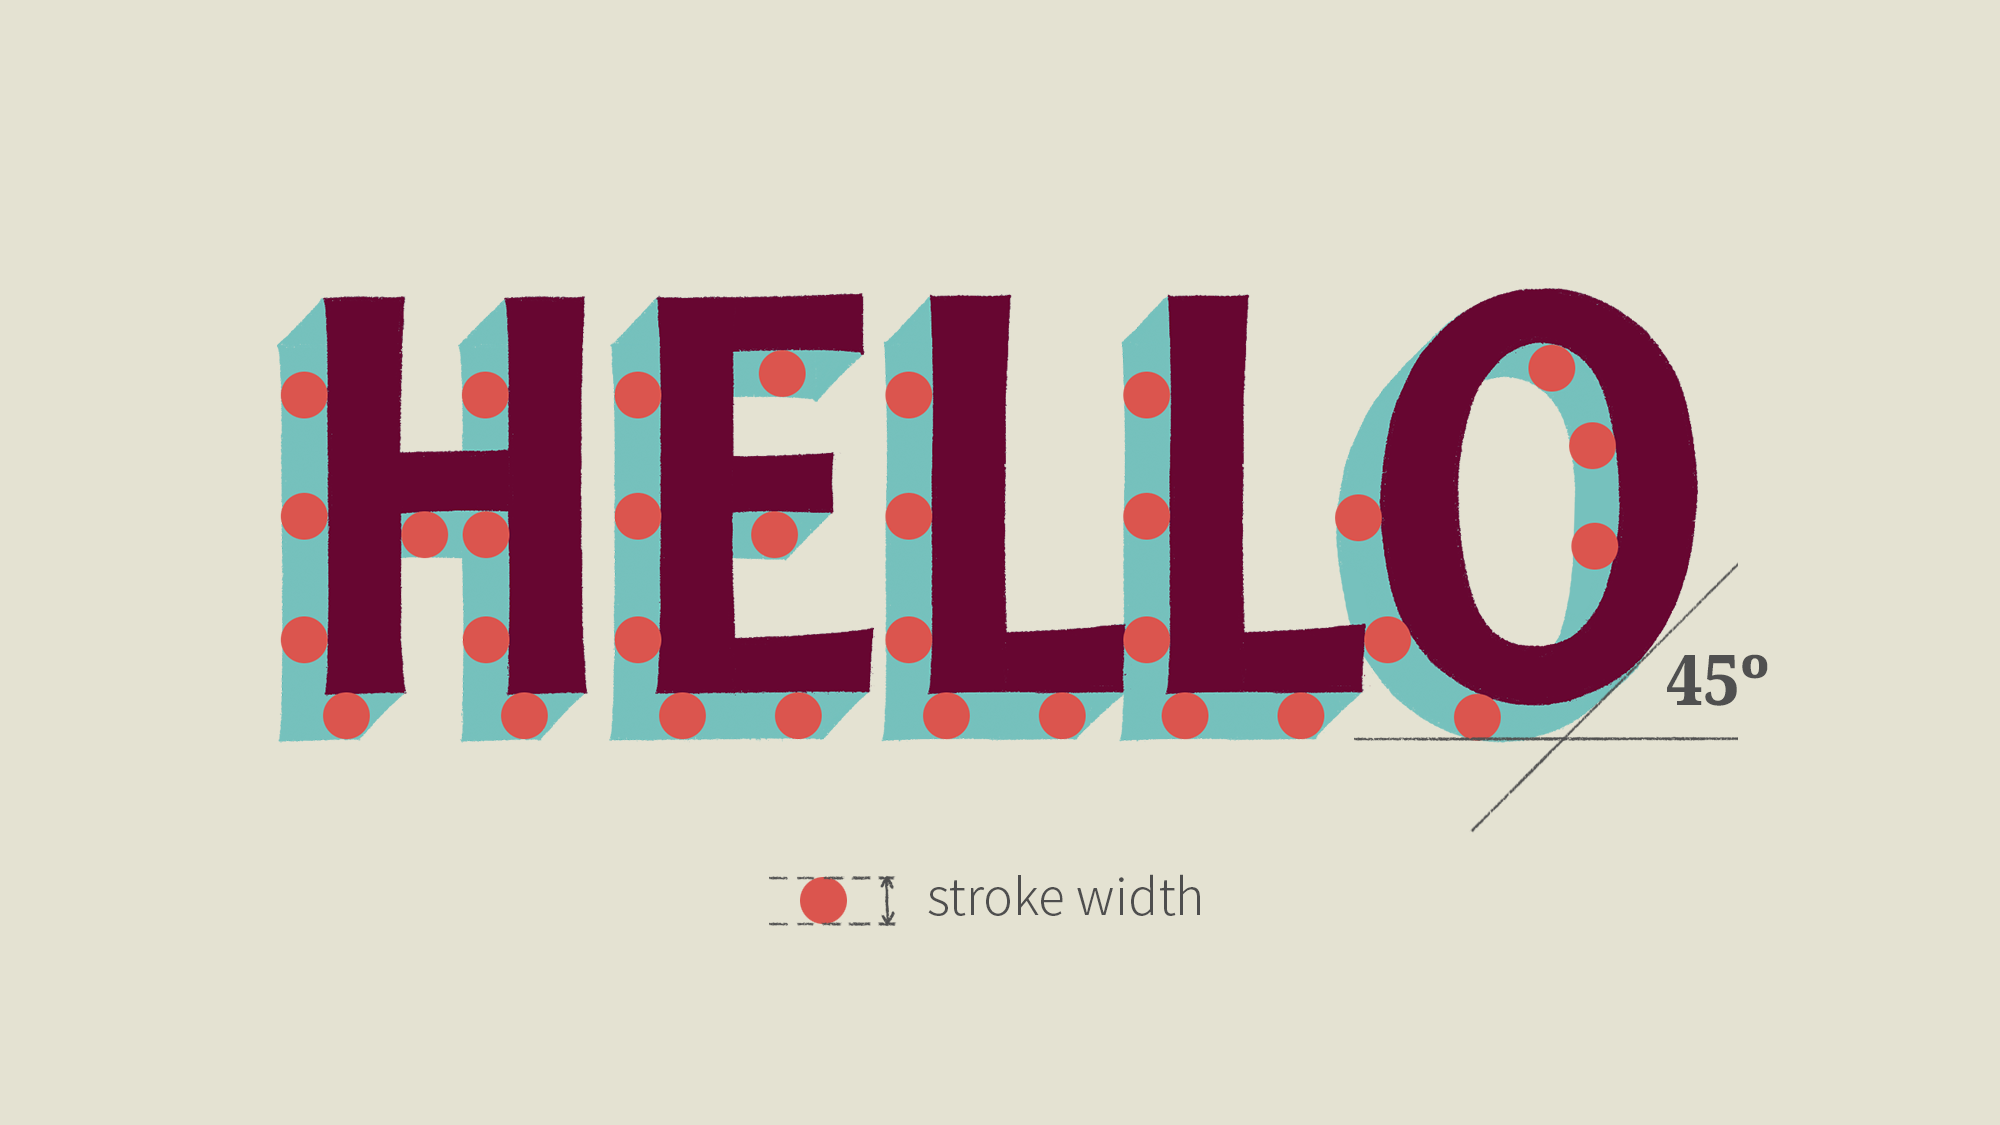 The word 'hello' with a block shade.